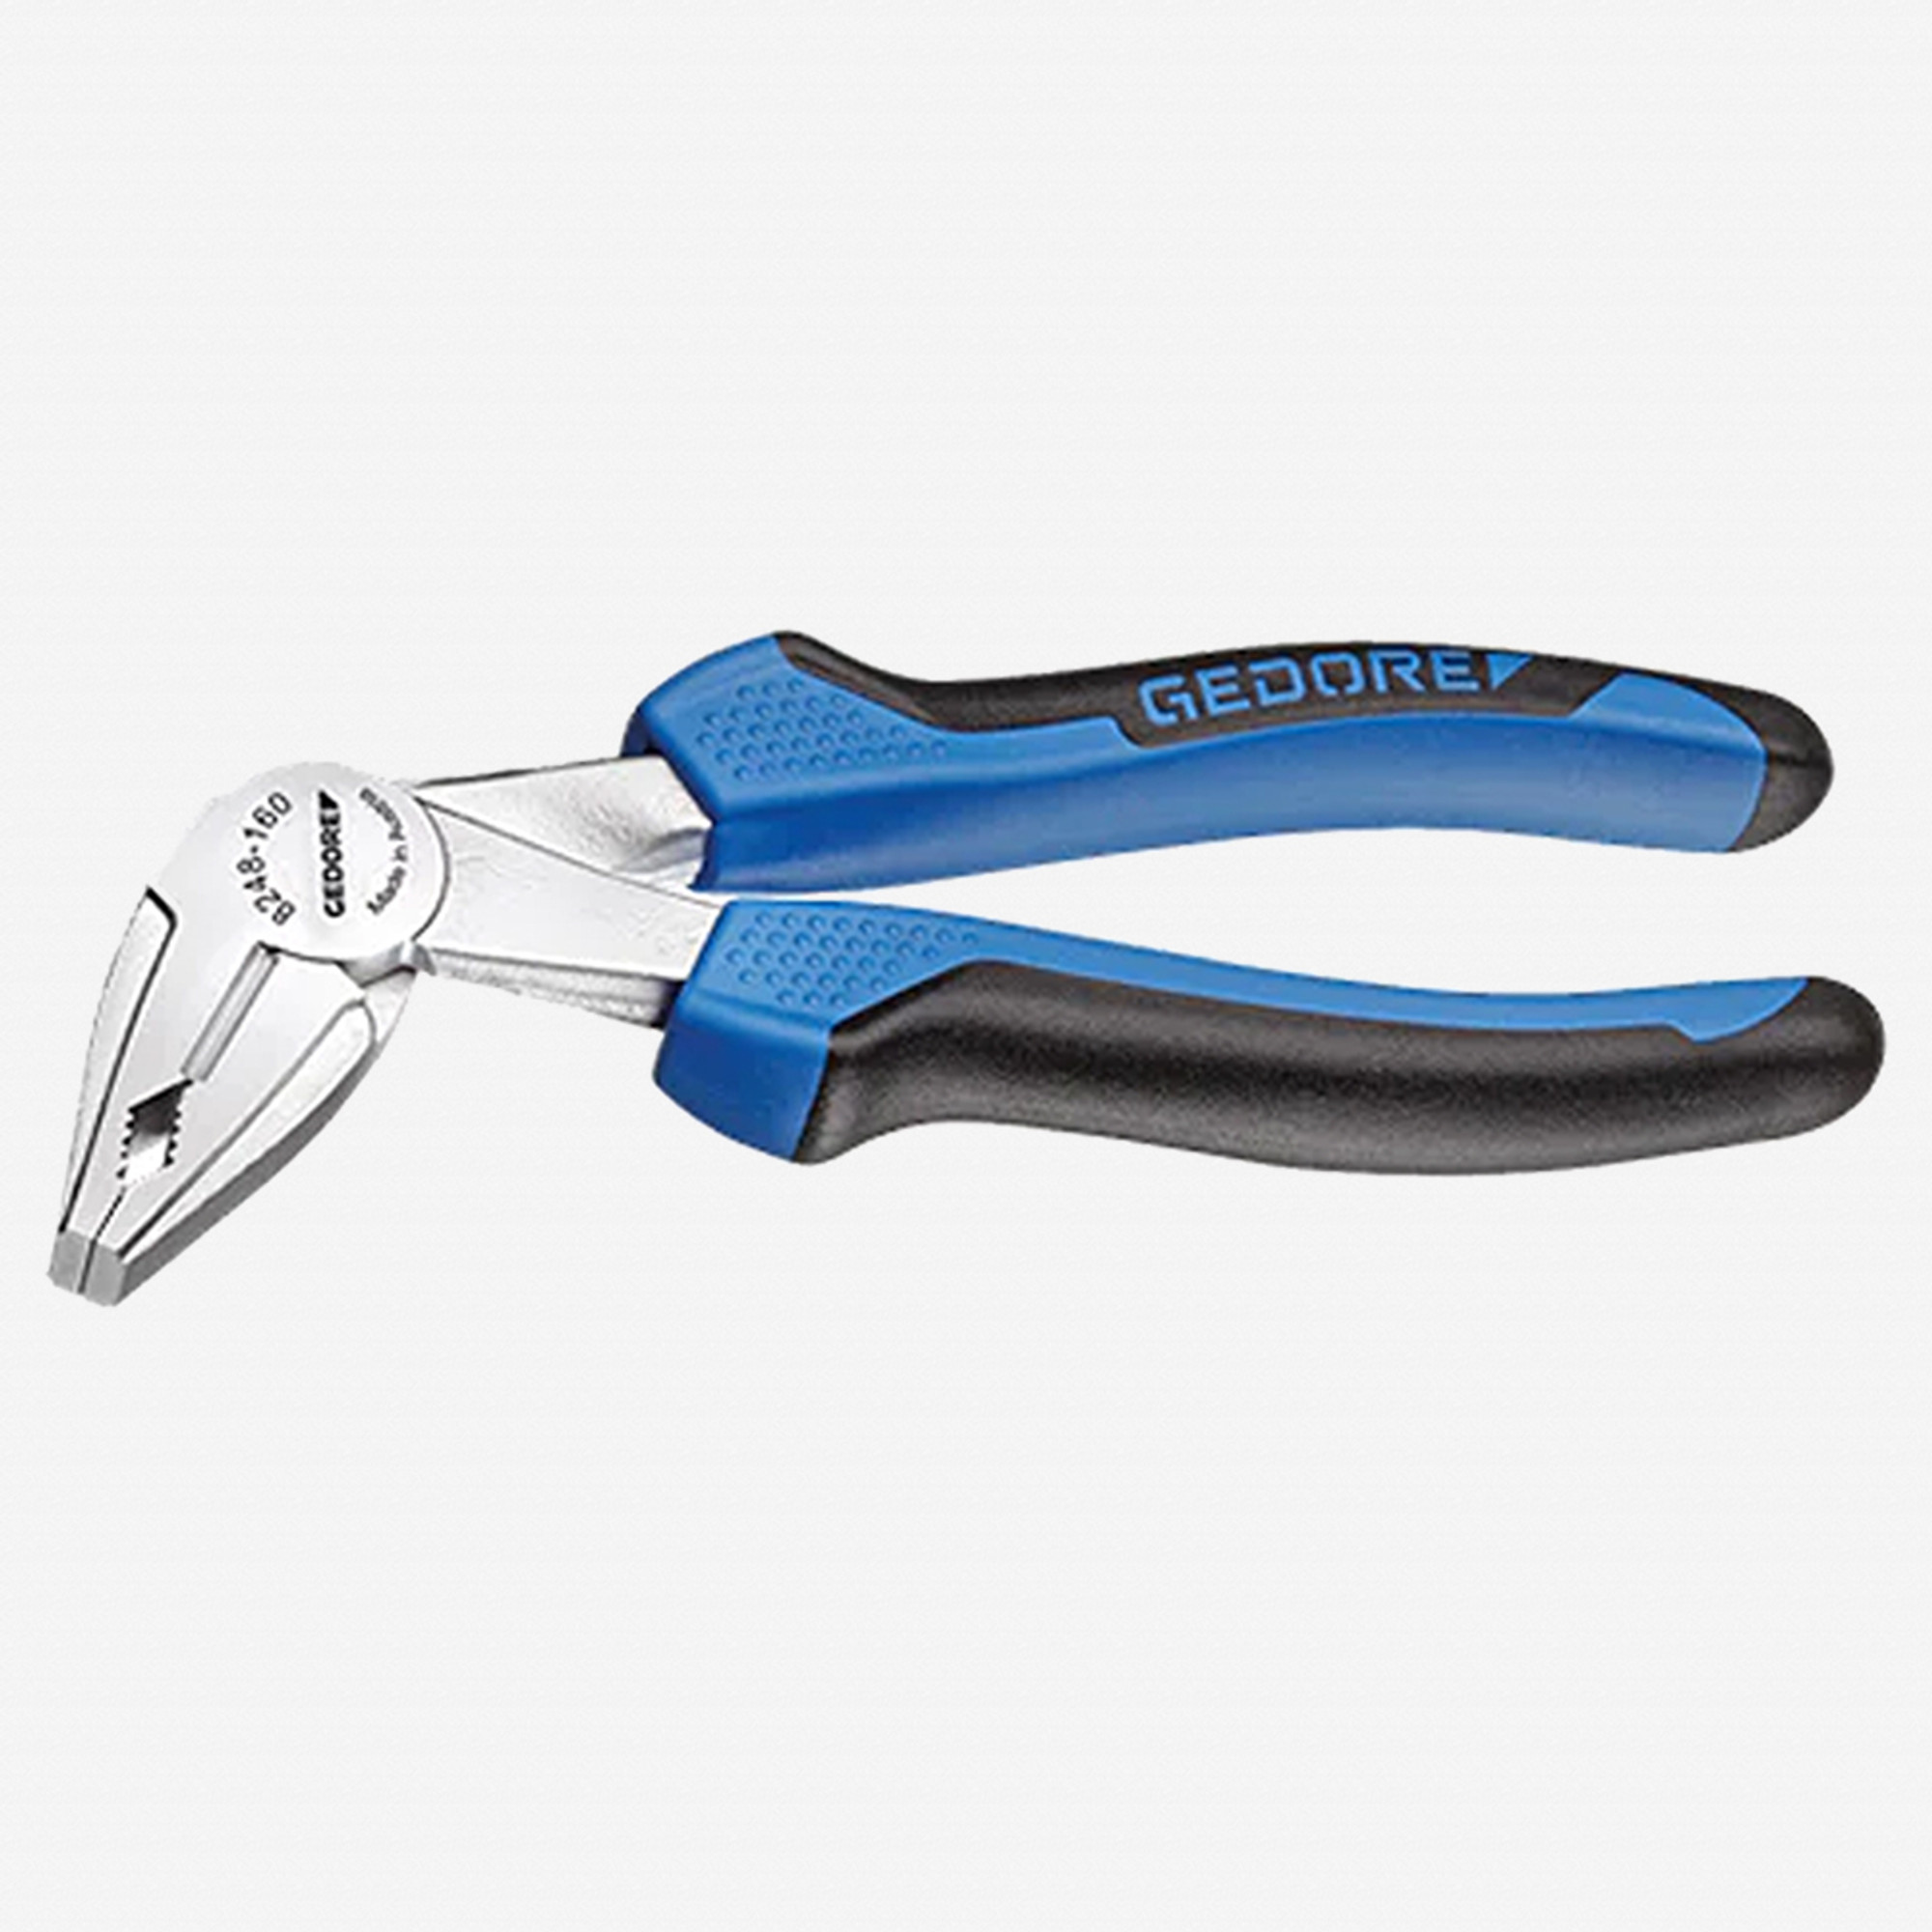 Gedore 8248-160 JC Combination pliers, angled, 160 mm - KC Tool